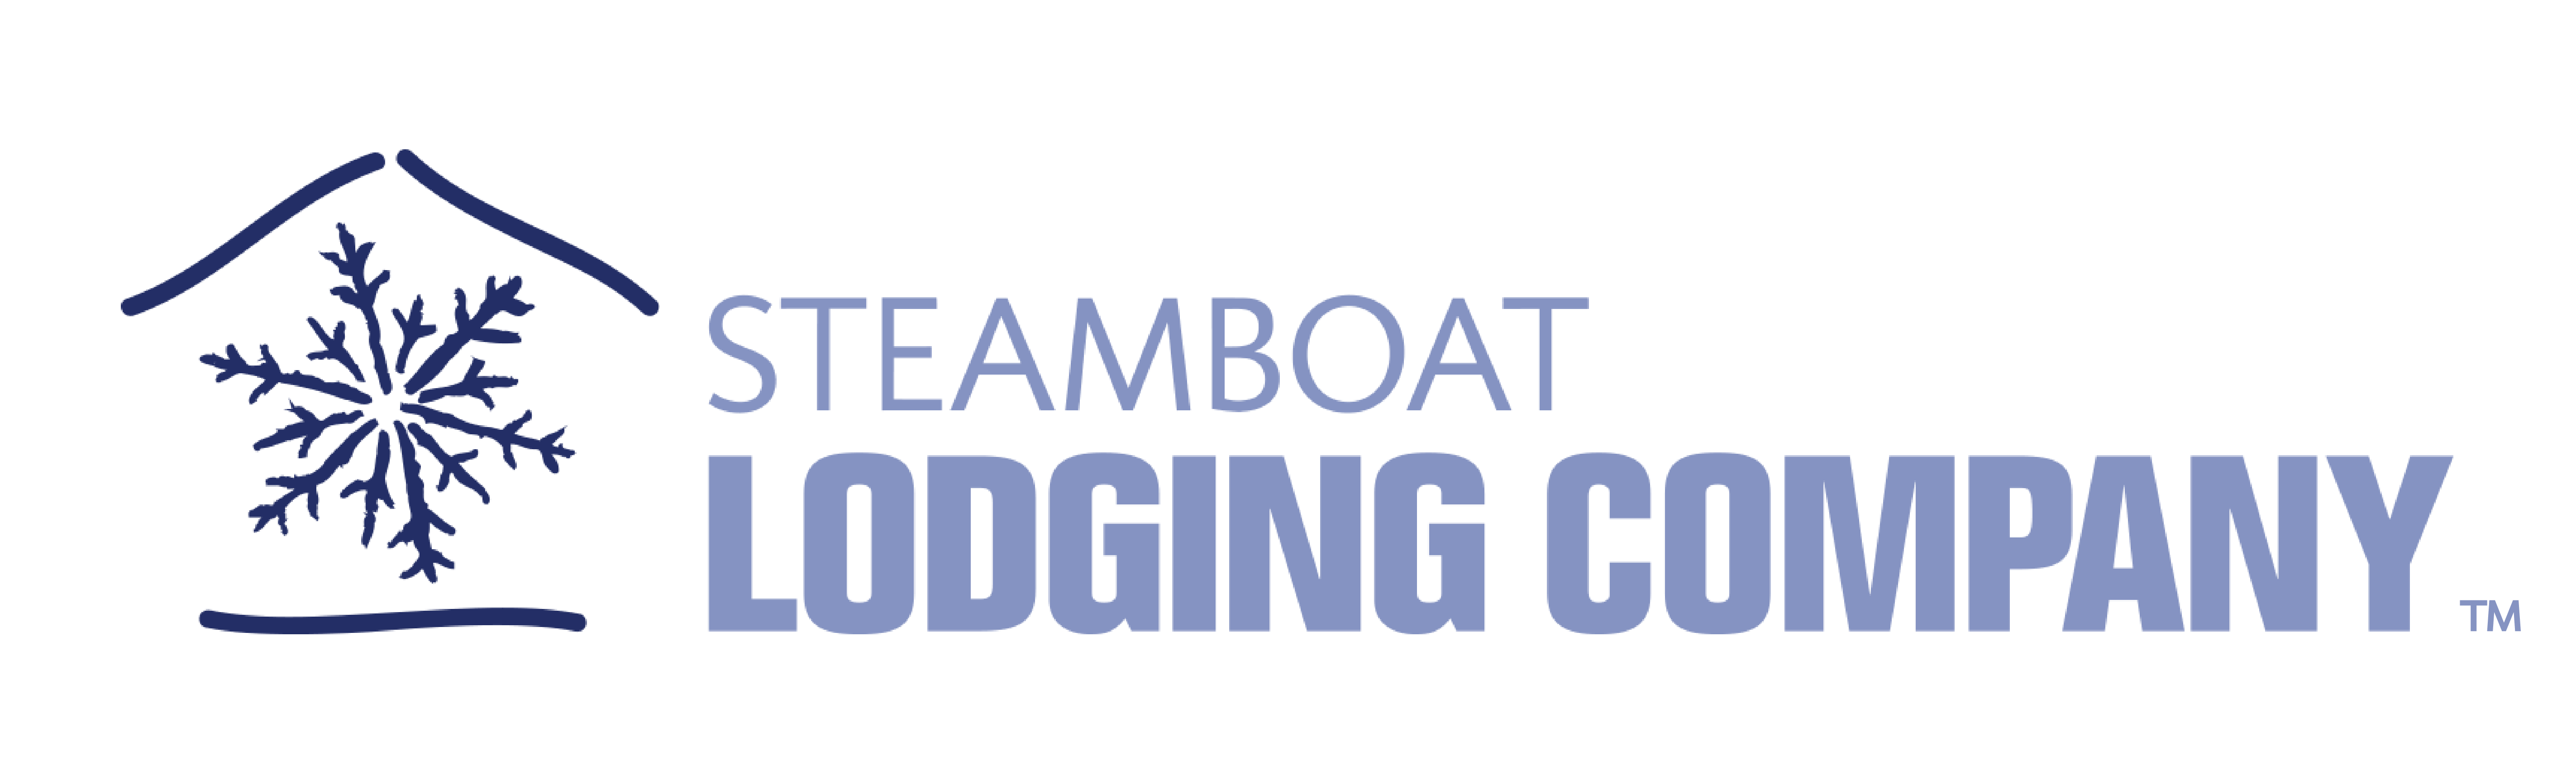 Steamboat Lodging Company - Steamboat Springs Colorado